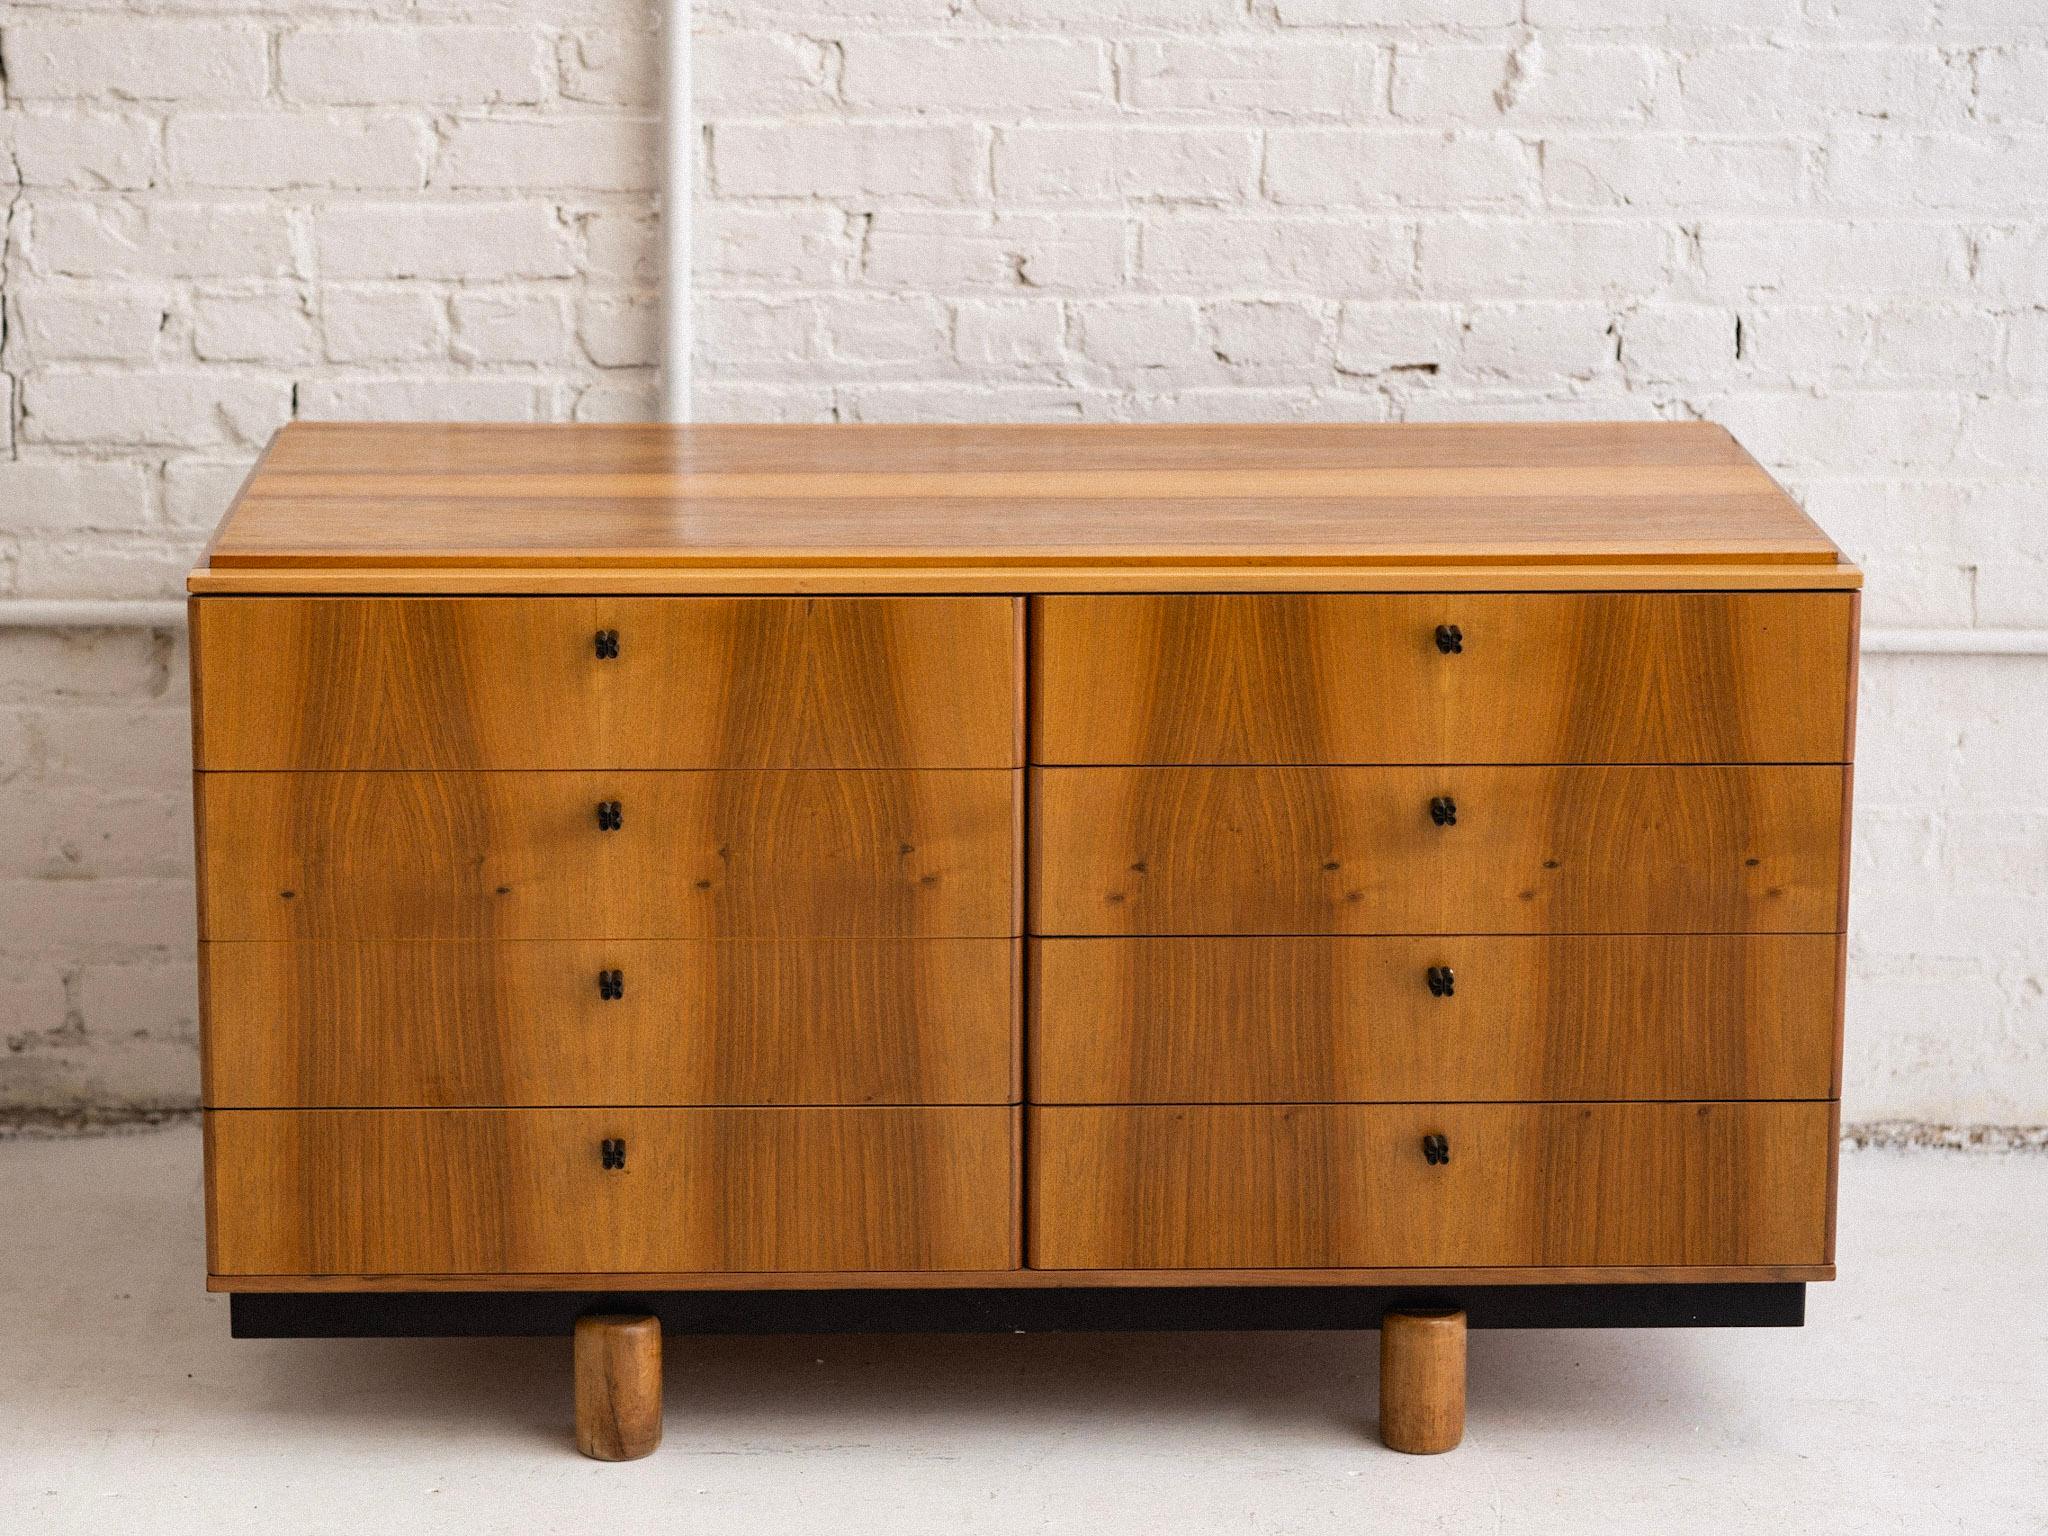 A mid century Italian sideboard cabinet by Gianfranco Frattini for Bernini. Model “807,” this pieces features 8 drawers, blonde wood and black Bernini branded hardware. Designed to be used alone or in tandem with other units from the “Ovunque” line.